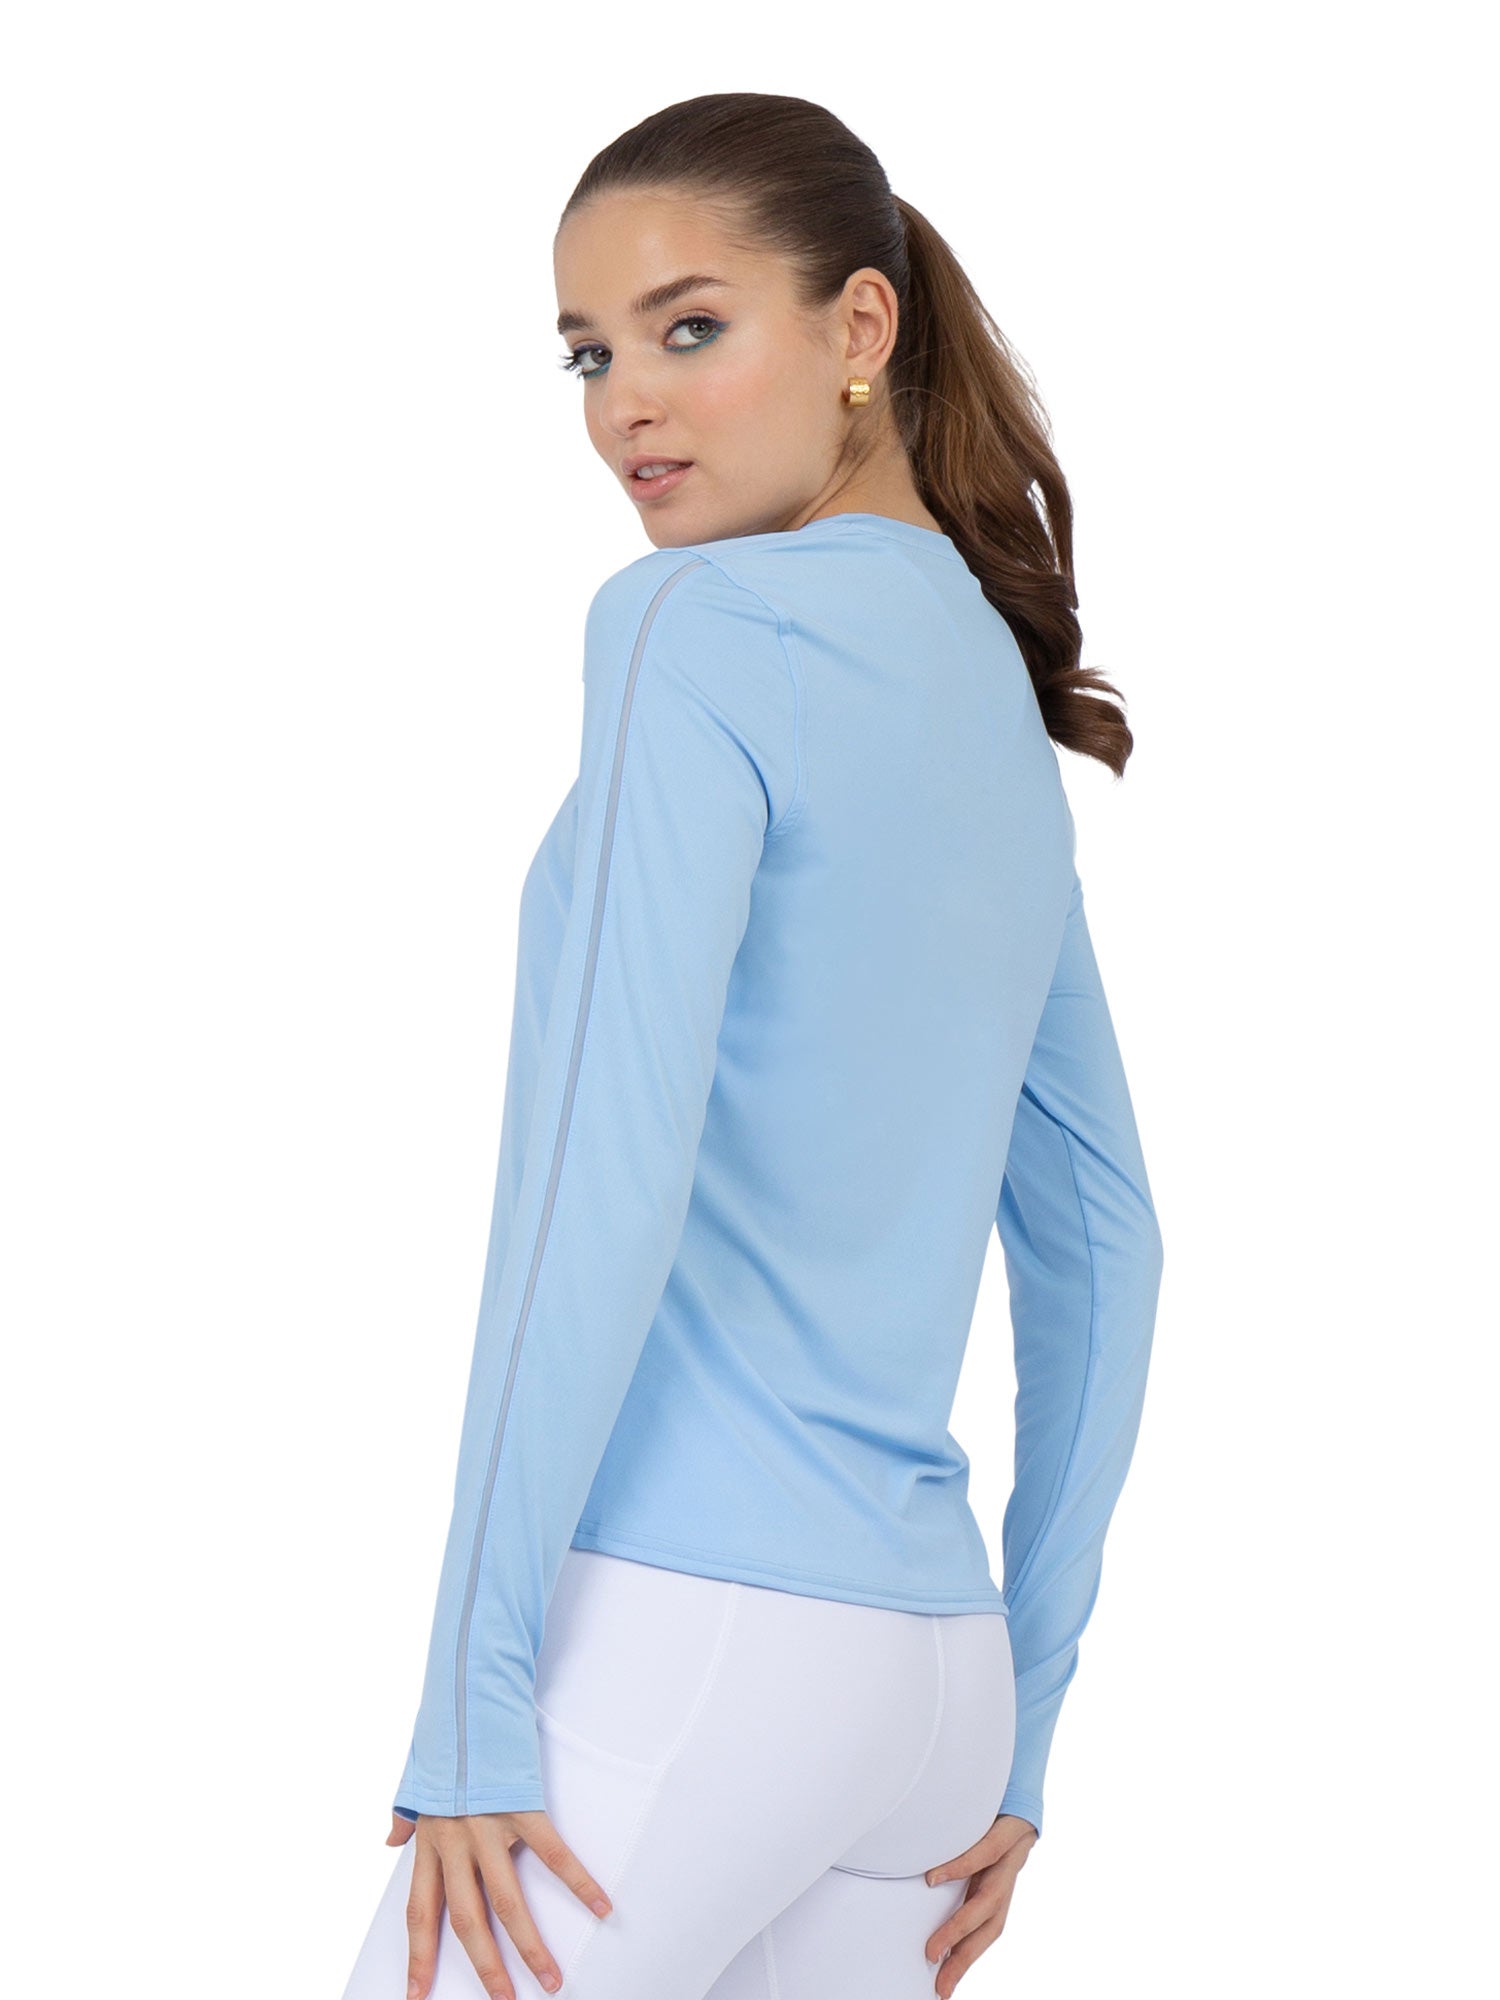 Back view of model wearing the Classic long sleeve crew neck in bluebell by inPhorm NYC with her hands at her side